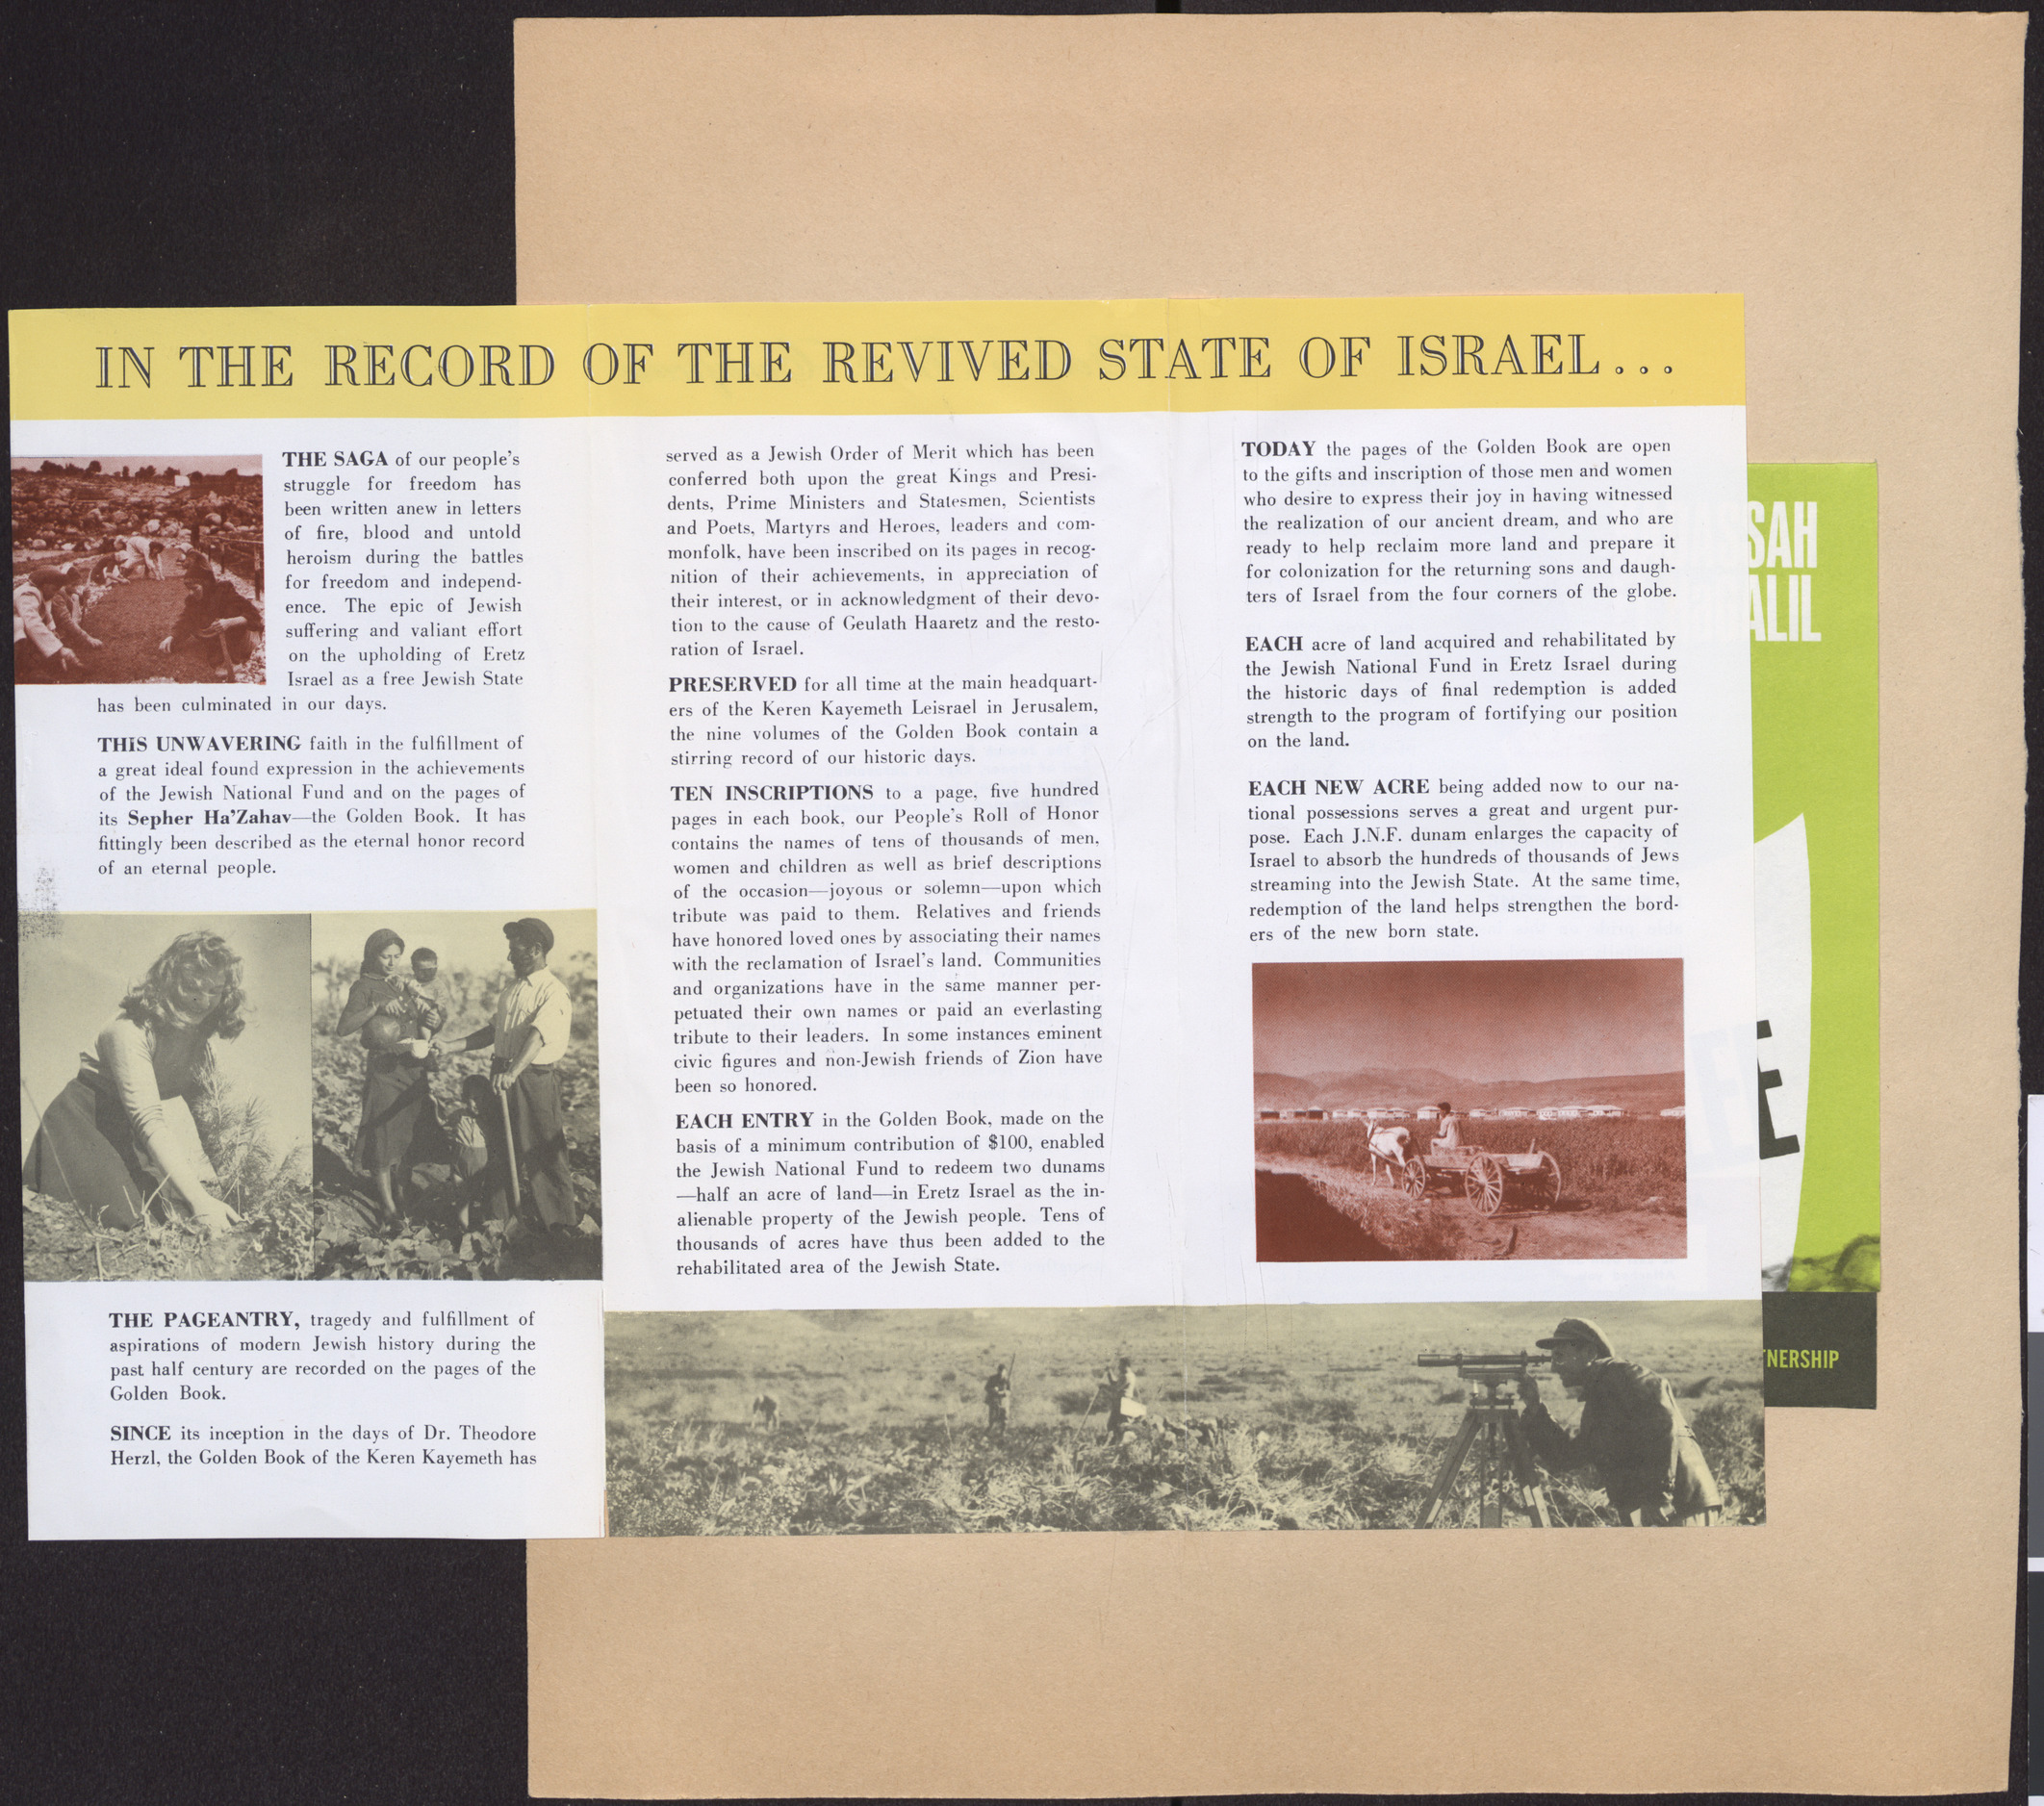 The Jewish People's Roll of Honor pamphlet, opening 2